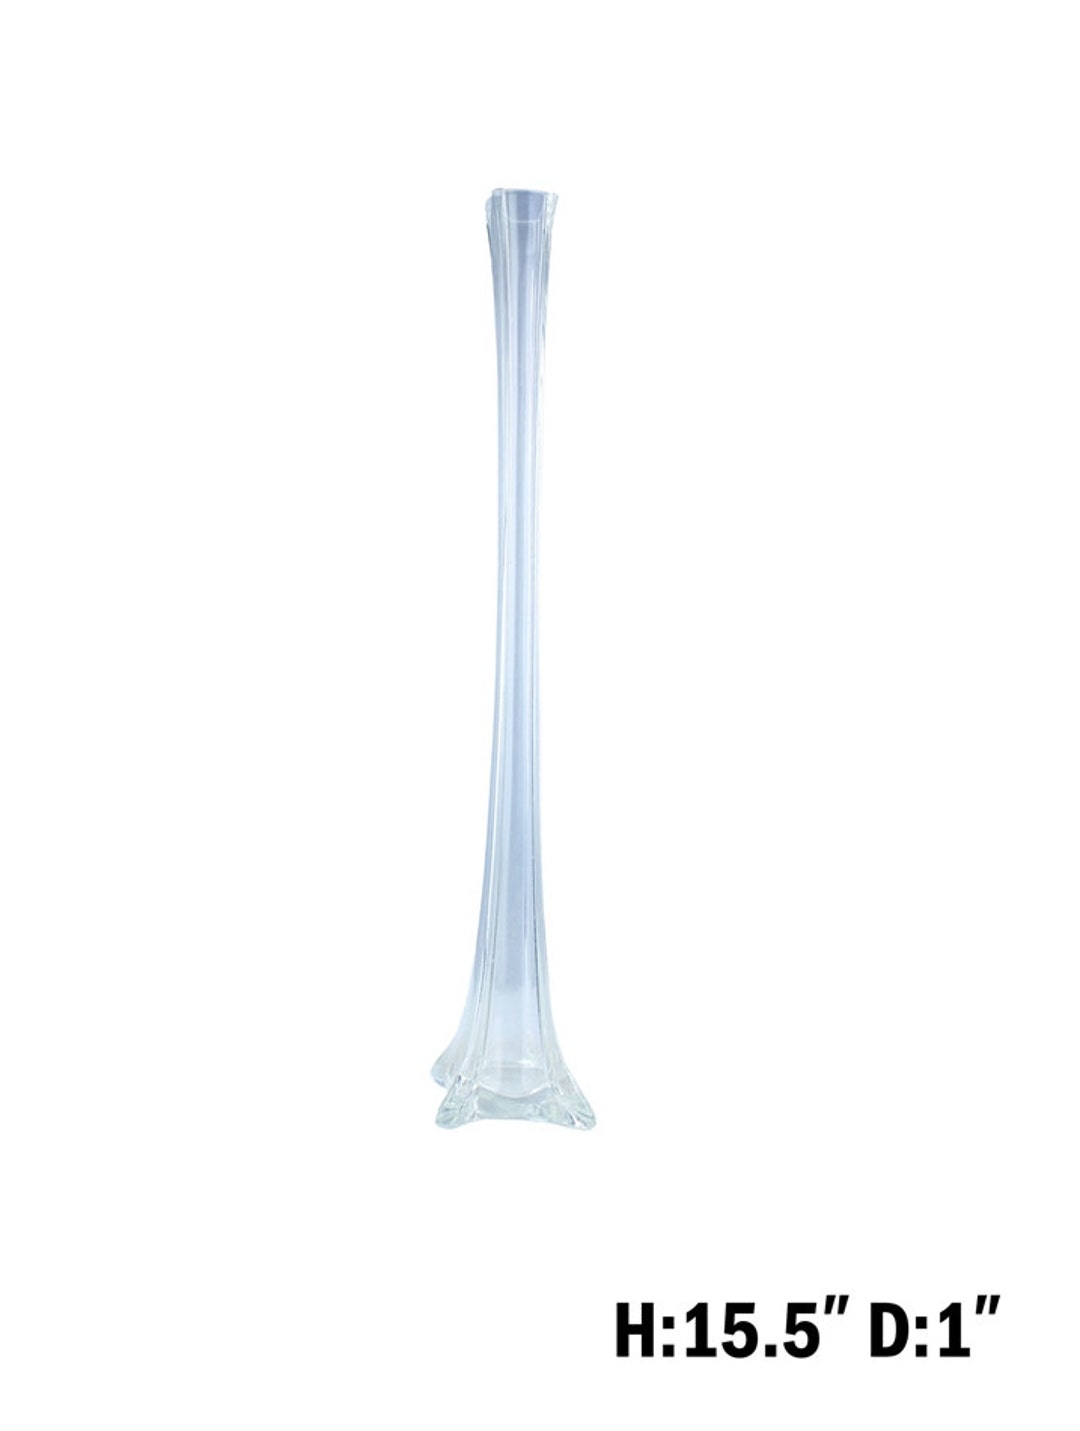 Inweder Tall Glass Vases for Centerpieces - 20 Eiffel Tower Vase Bulk,  Tall Skinny Vase, Long Thin Clear Glass Vase, Slim Decorative Flower Stand